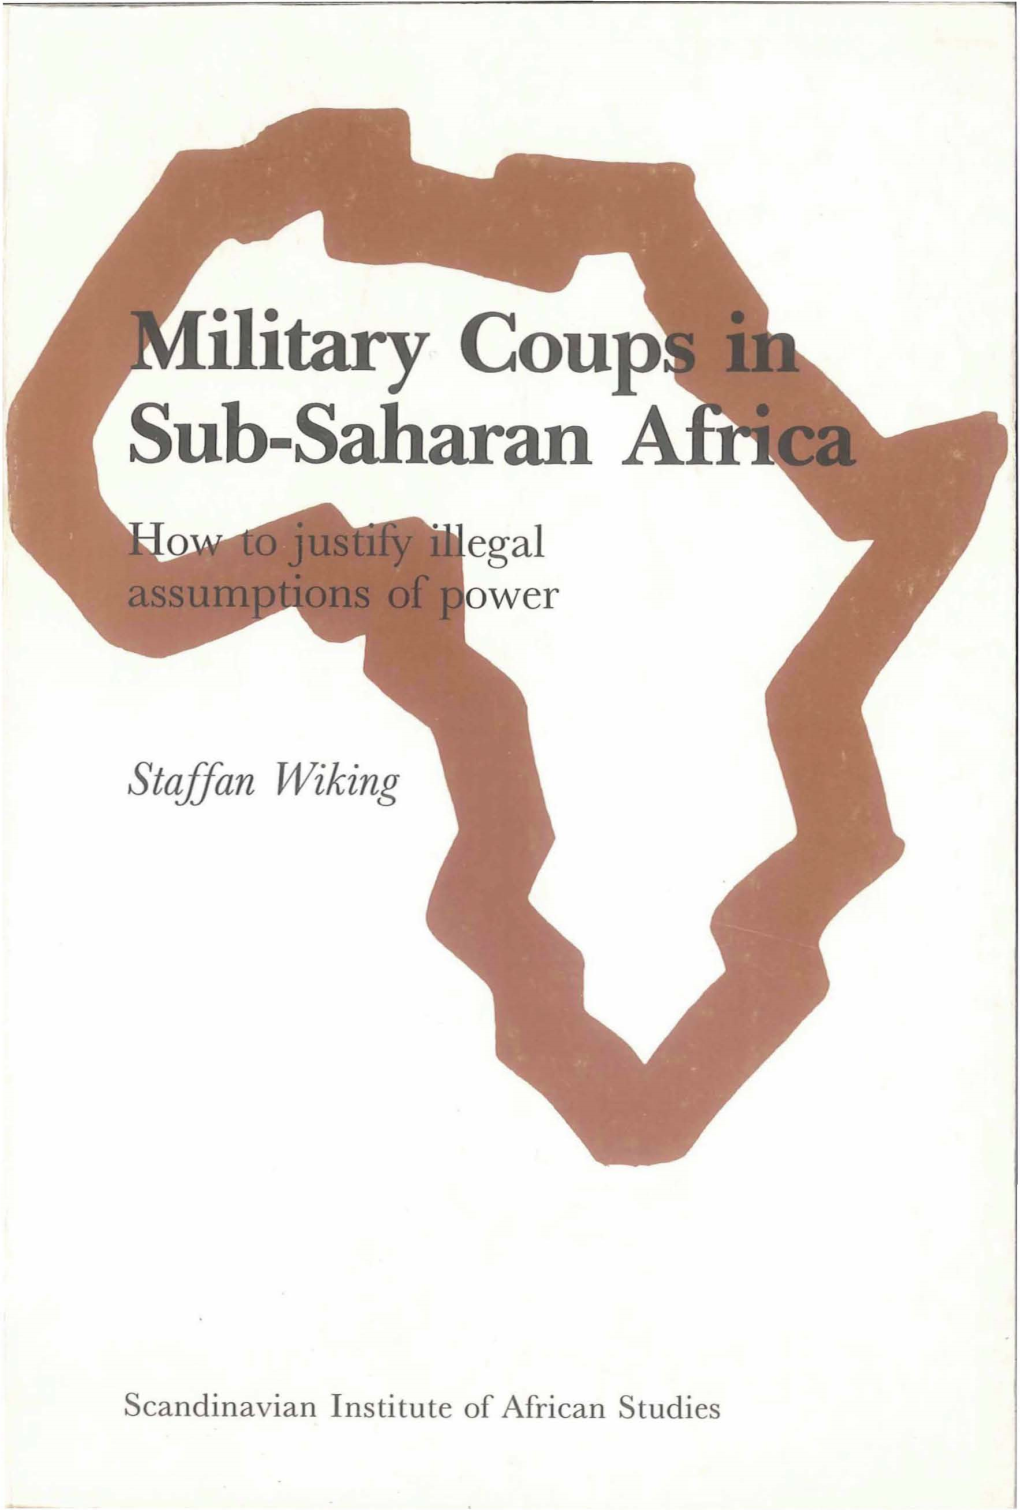 Military Coups in Sub-Saharan Africa